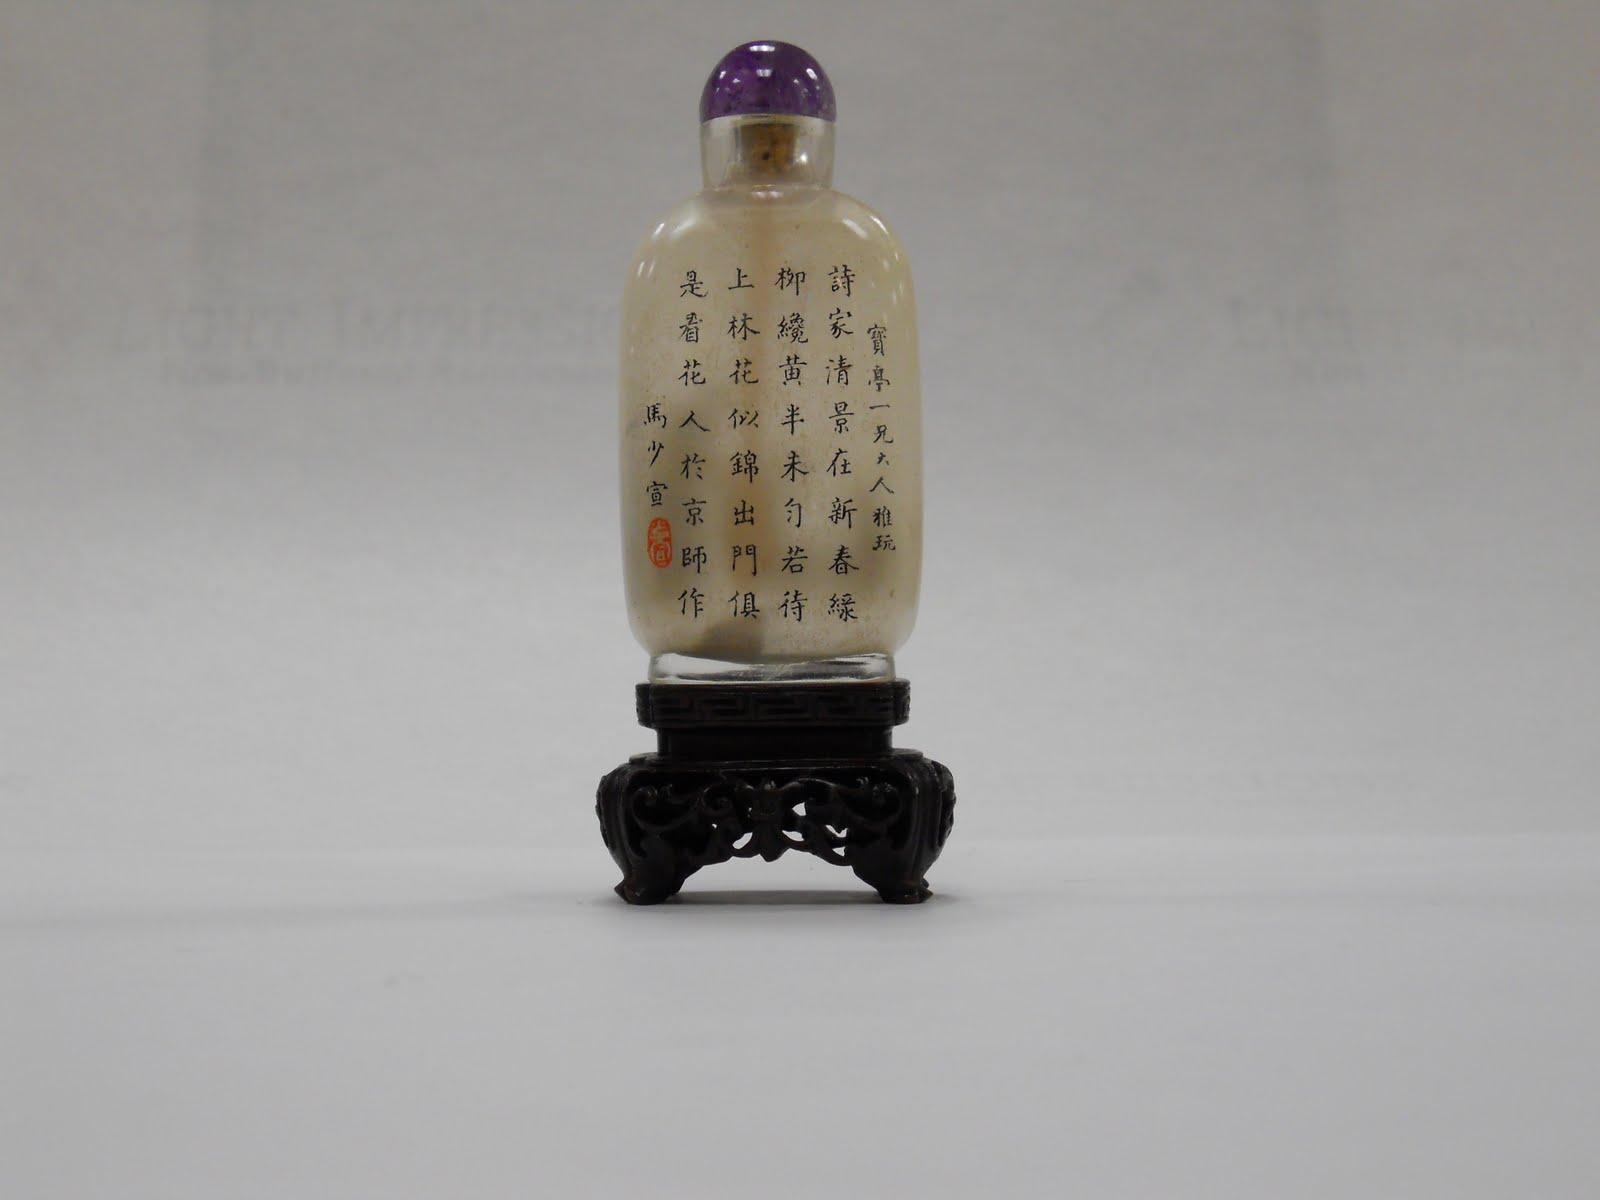 Chinese snuff bottle with black Chinese characters against a tan background and a deep purple top